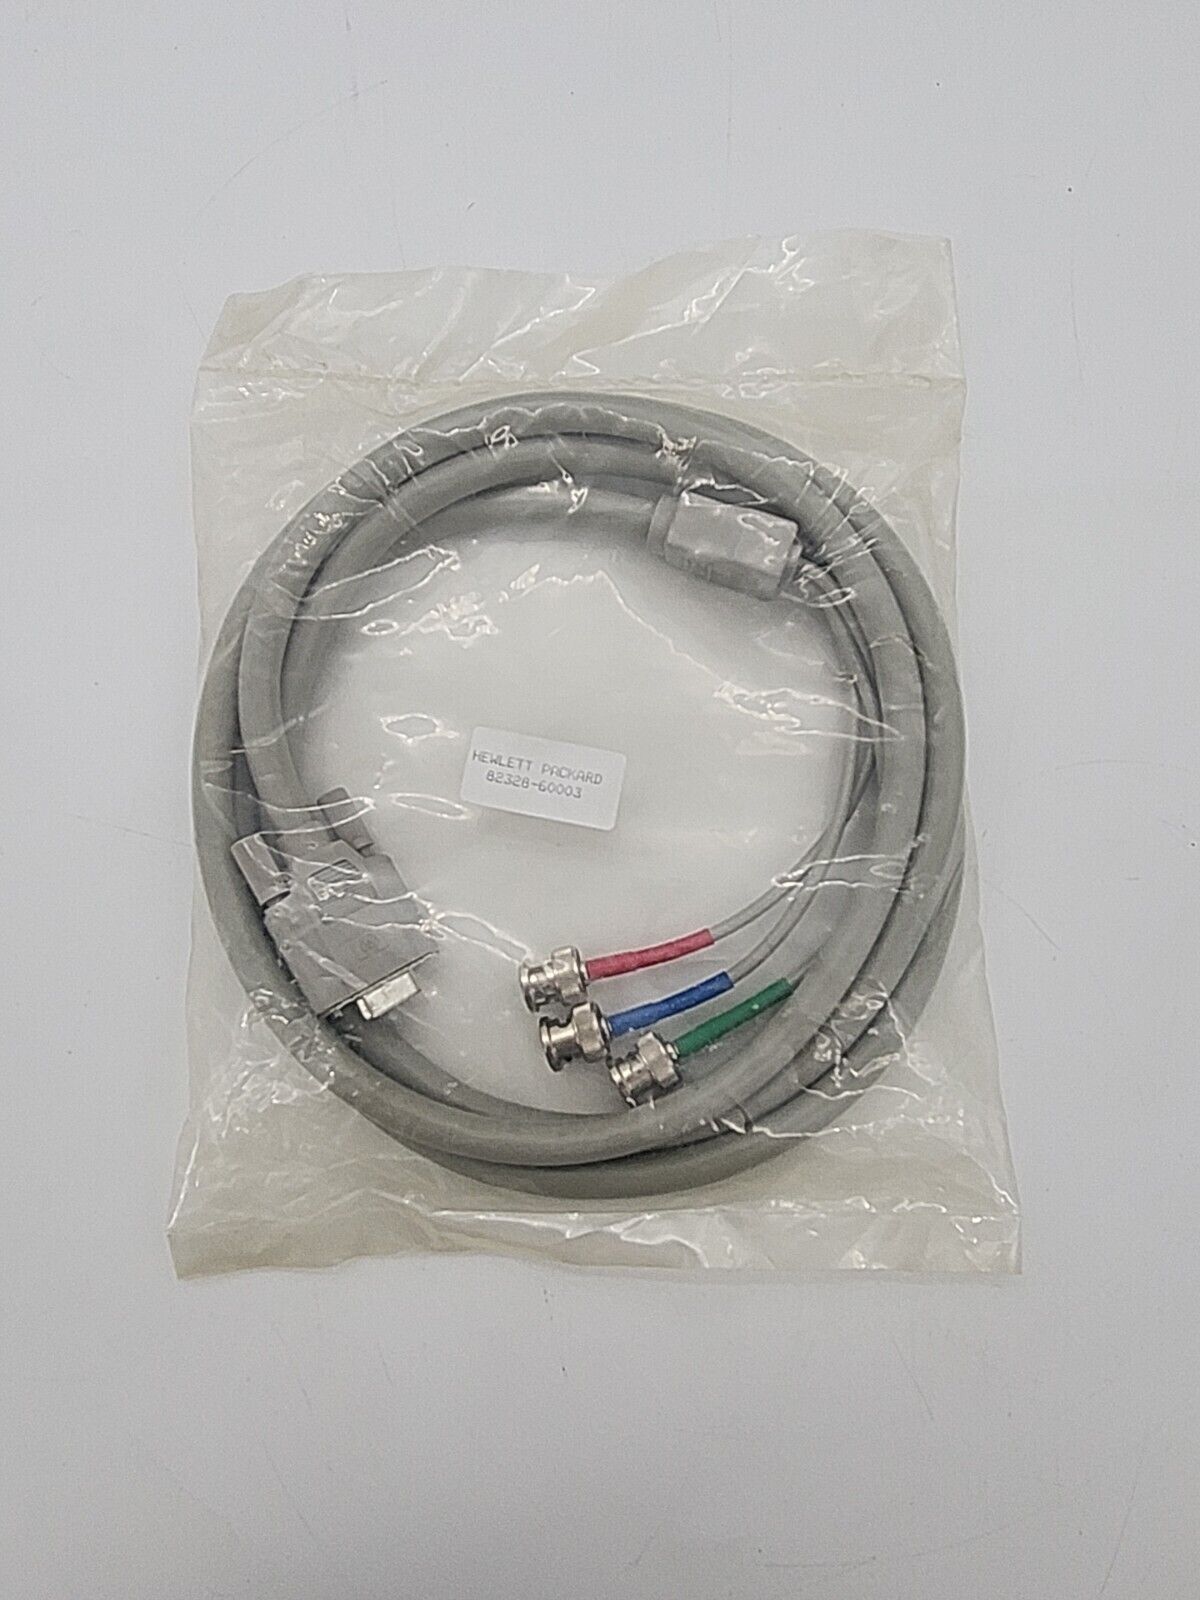 Vintage HP 82328-60003 Cable New Sealed Hewlett Packard VGA cord. 